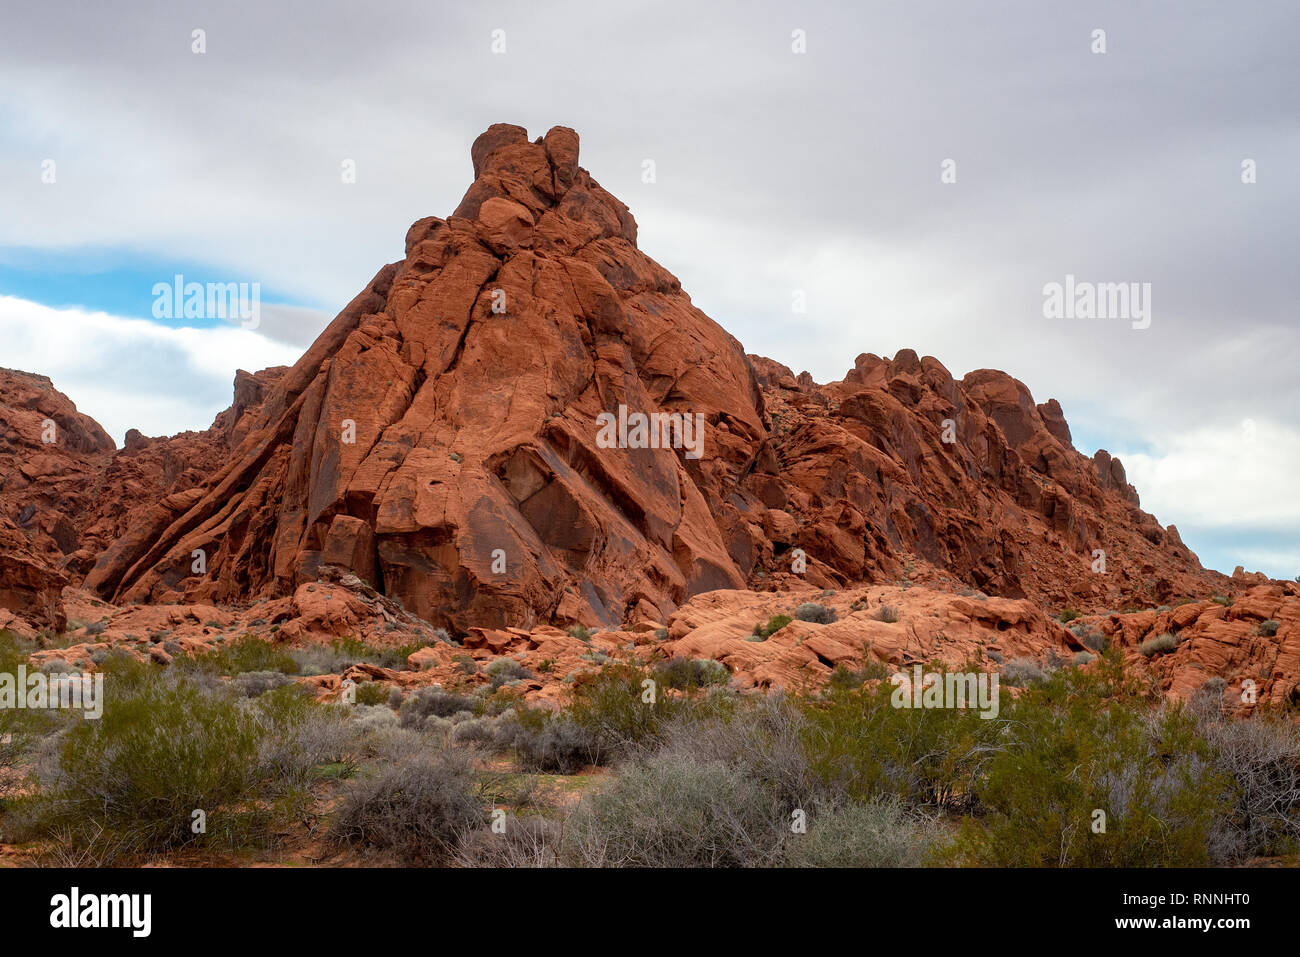 USA, Nevada, Clark County, Valley of Fire State Park. An ancient pyramid superstructure carved by prehistoric people from a sandstone monolith. Stock Photo